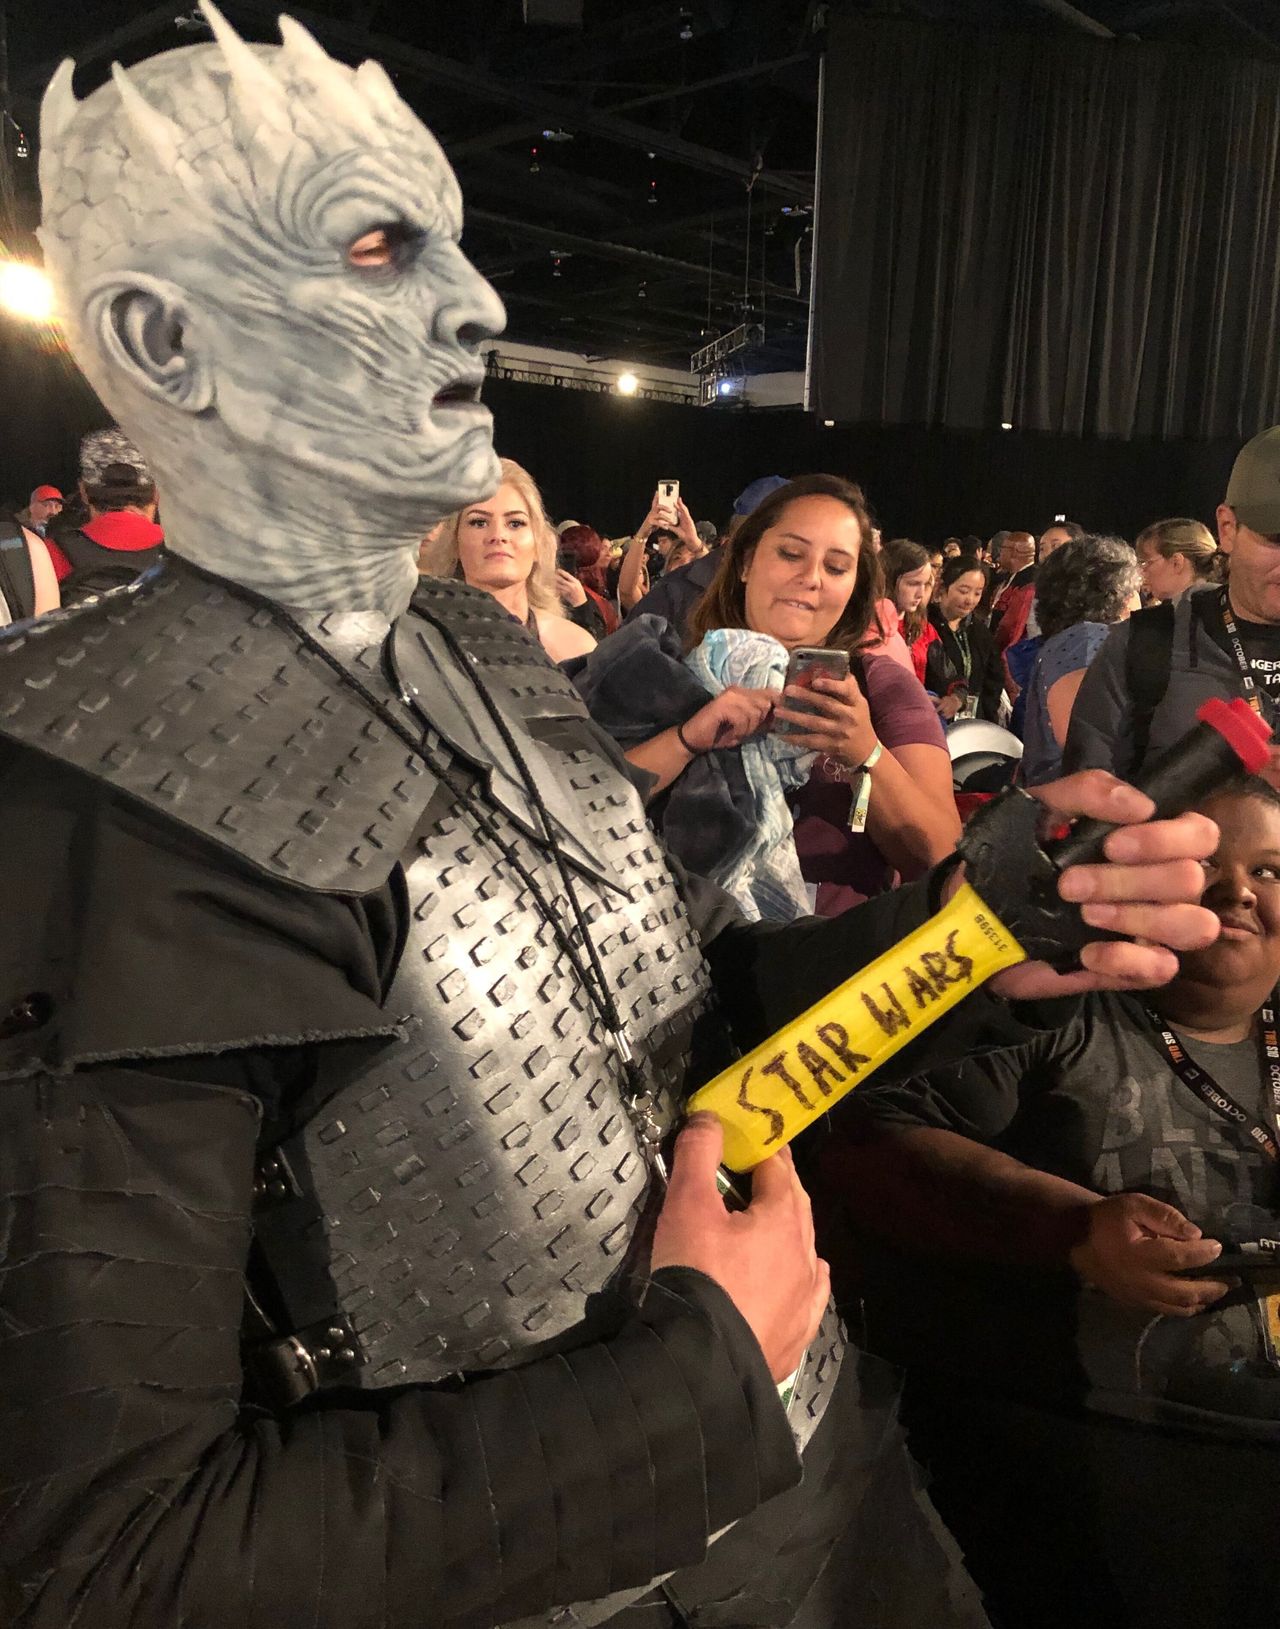 A Night King cosplayer with a dagger saying “Star Wars” on the side at Comic-Con. Fans had accused the showrunners of rushing the final season to start writing new “Star Wars” films for Disney.